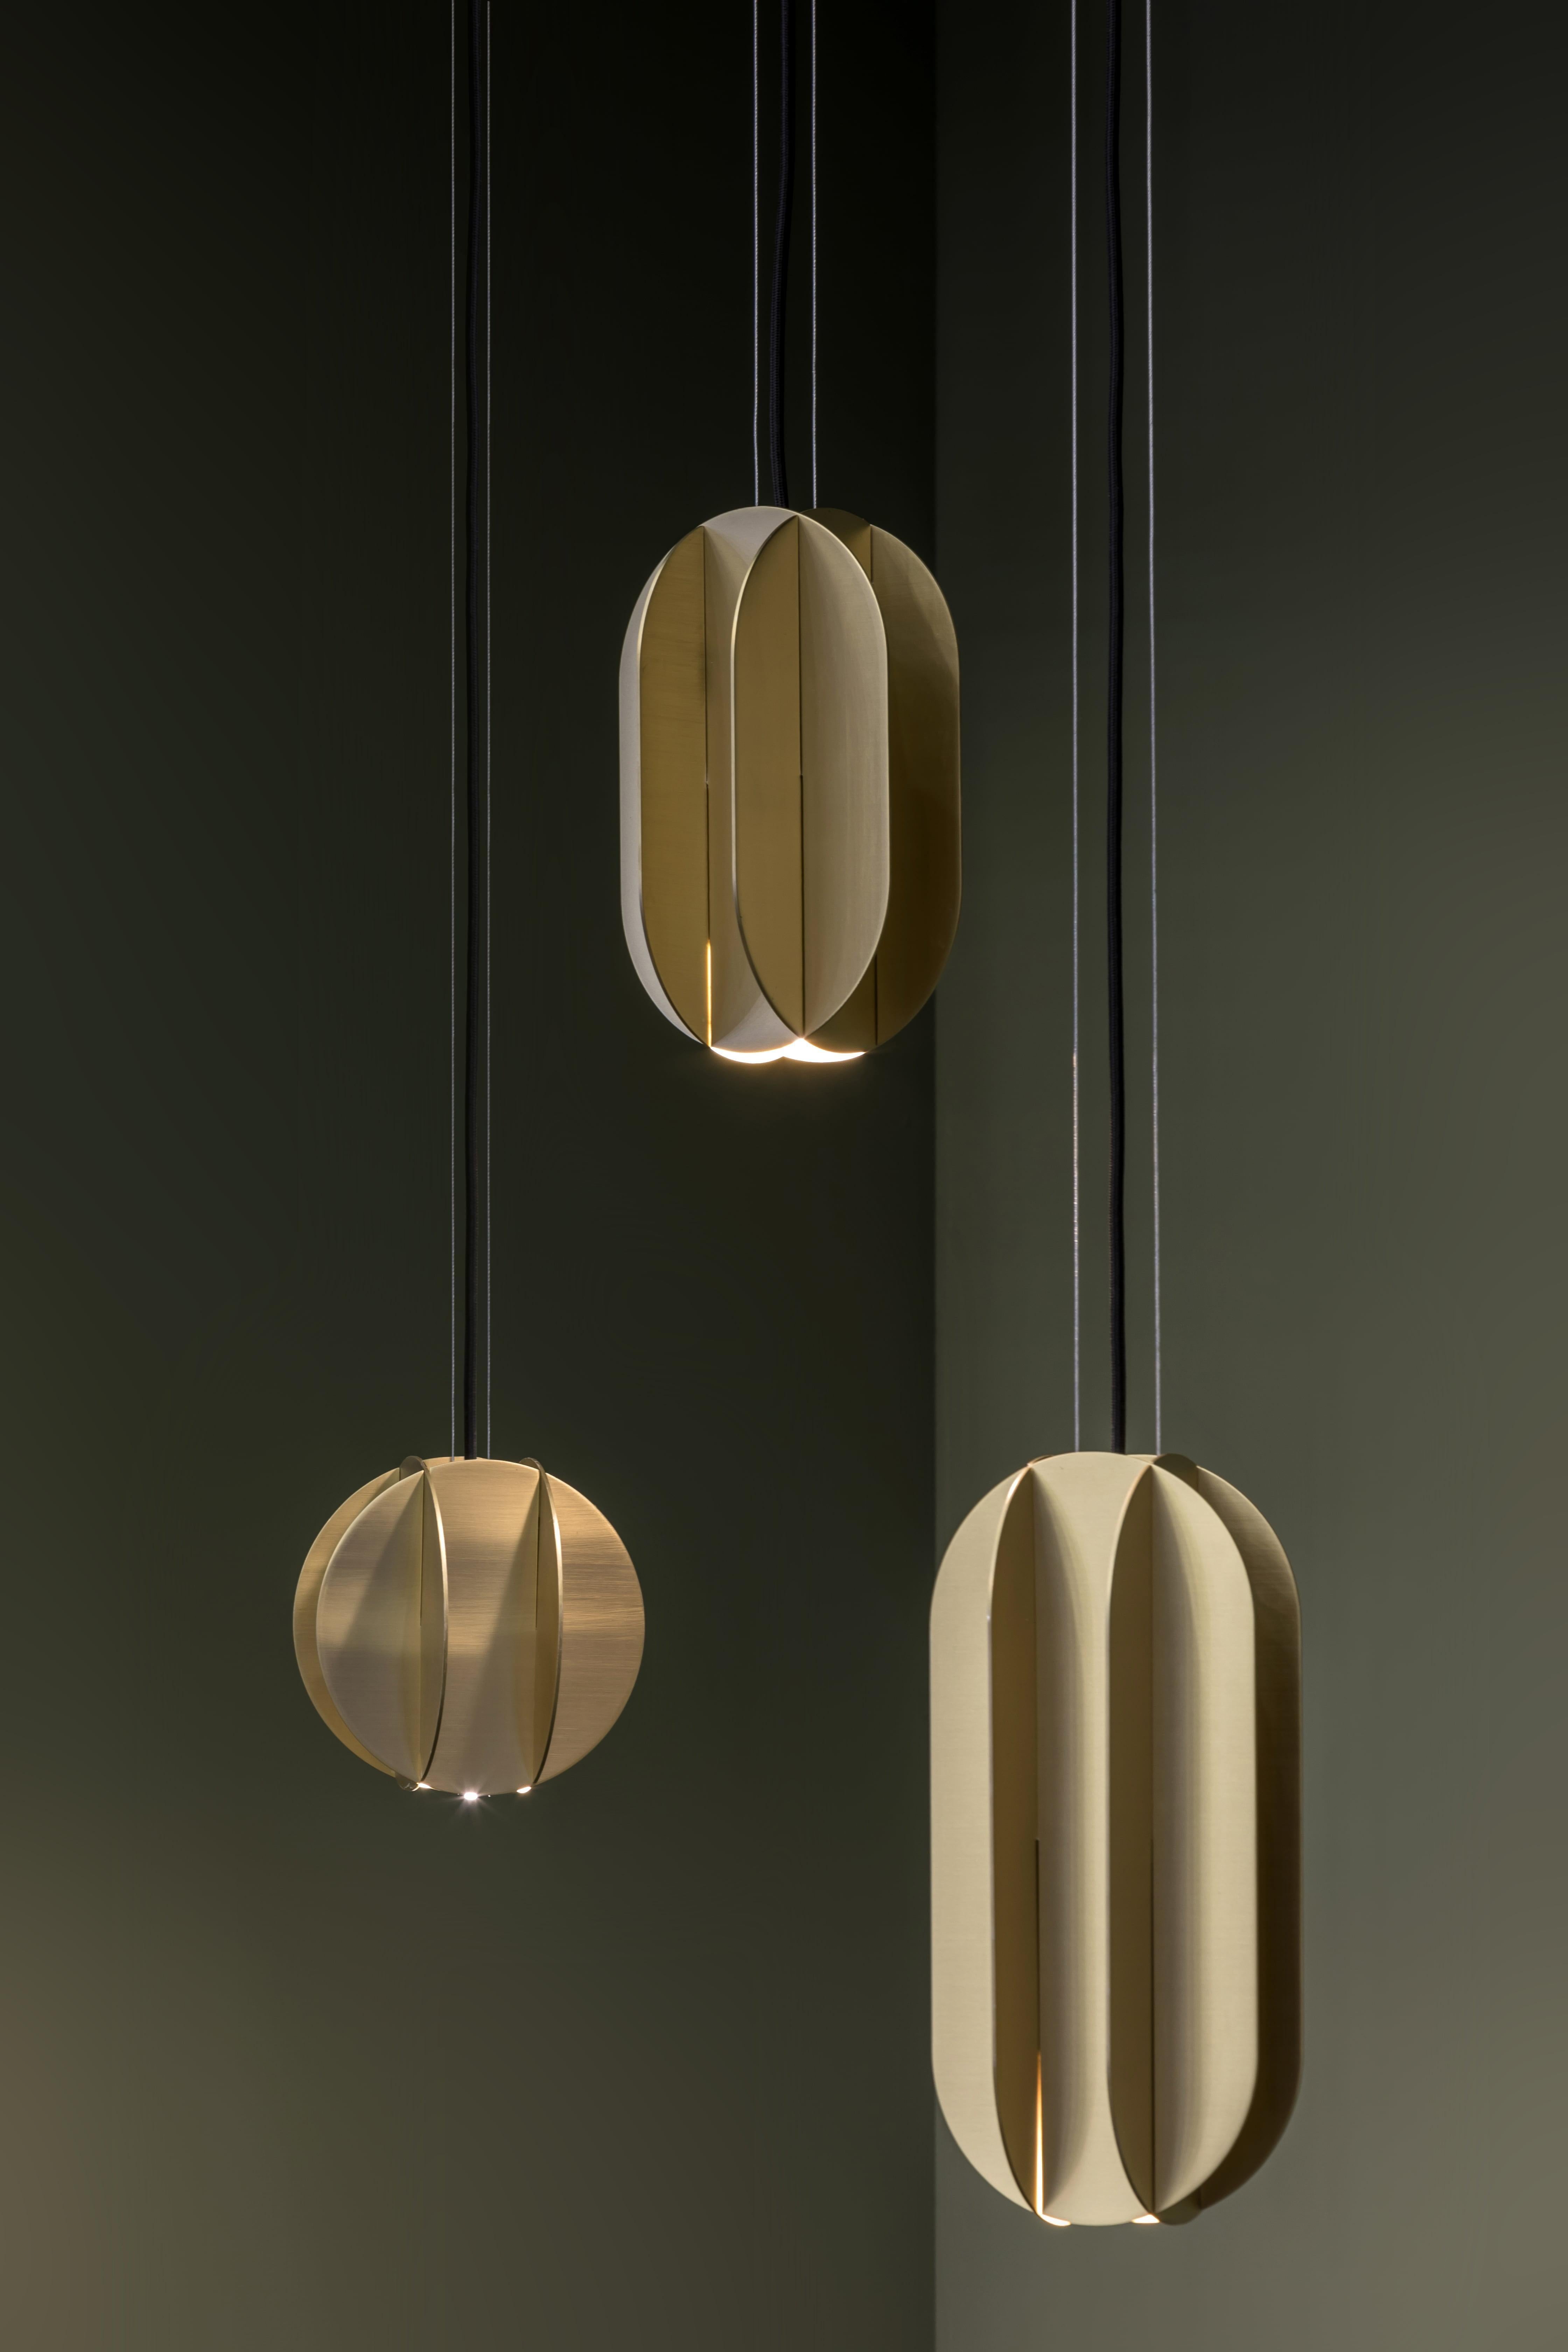 Brand: NOOM
Designer: Kateryna Sokolova
Materials: Brass
Dimensions: H 33 cm x W 15 cm x D 15 cm
Net Weight: 3 kg
Electrification: 2 × LED G9 10W.

EL collection of lighting is inspired by the geometric works of the great Suprematist artists El